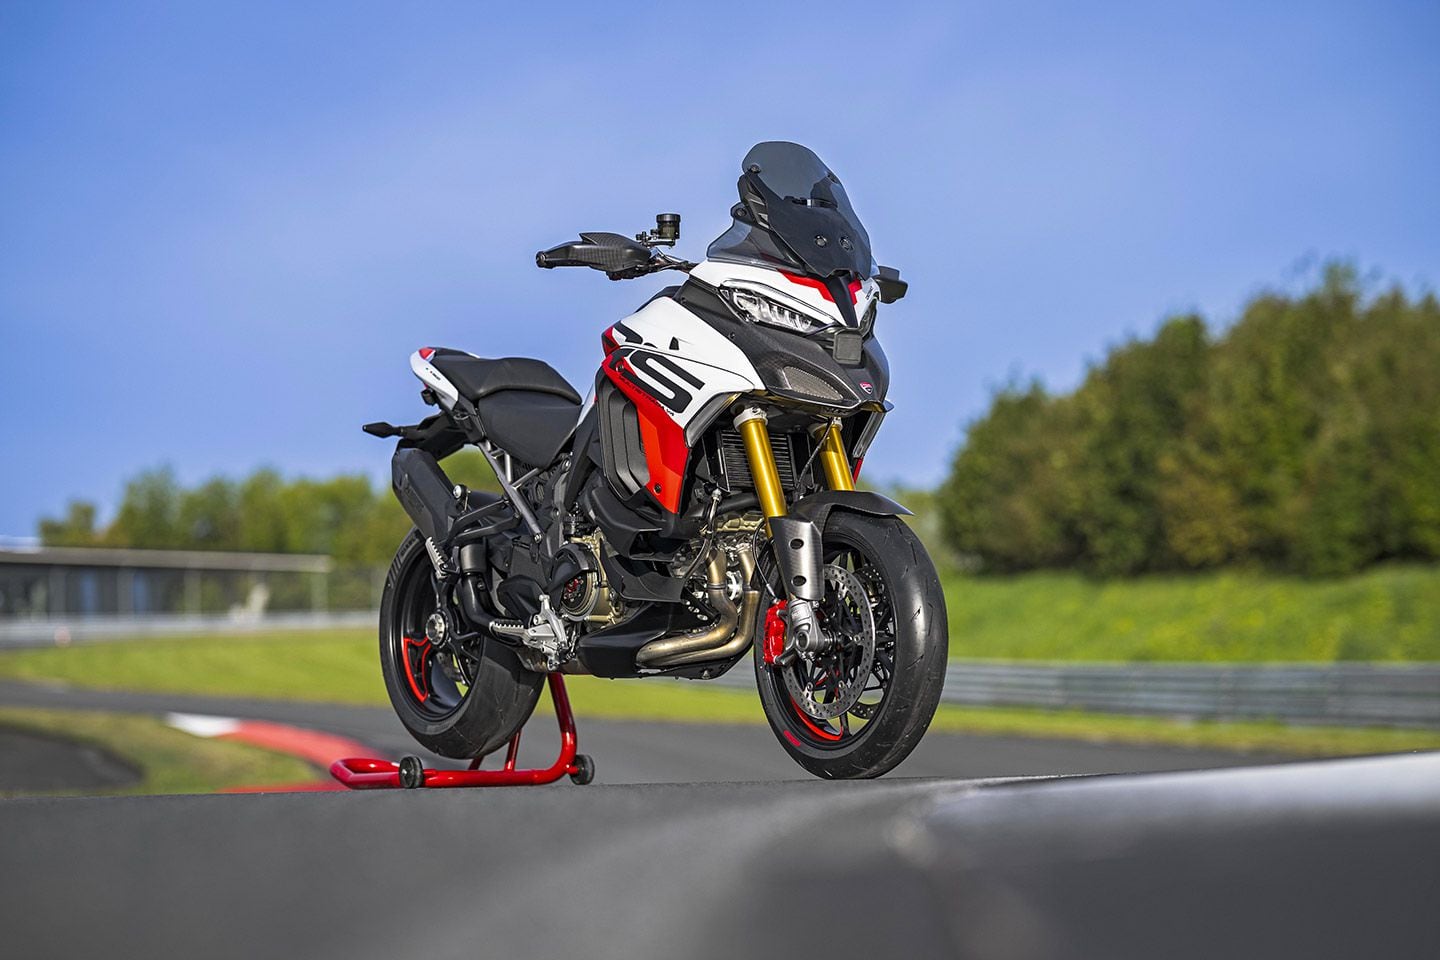 Ducati’s Multistrada V4 RS gets 17-inch wheels and a Desmosedici Stradale engine for serious sporting performance.